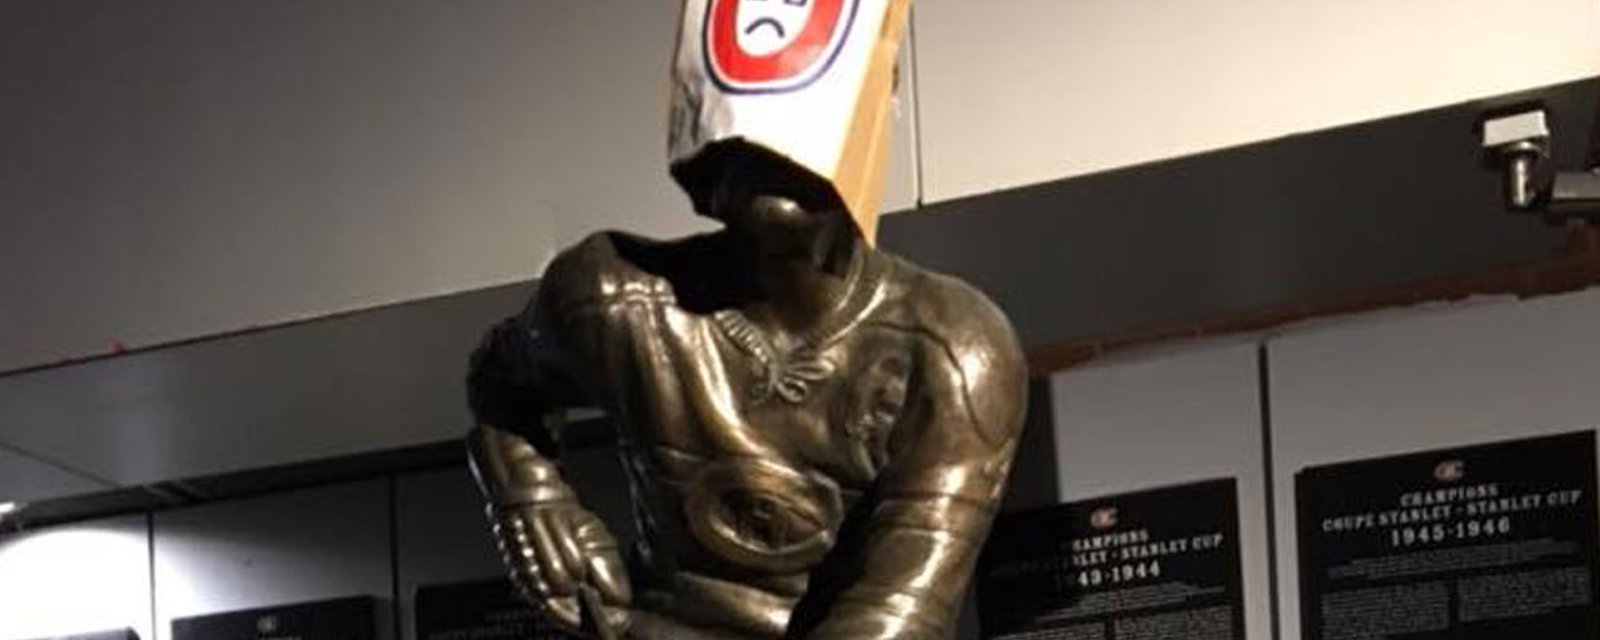 Breaking: Fed up Habs fan vandalizes legend statues to send message to ownership! 